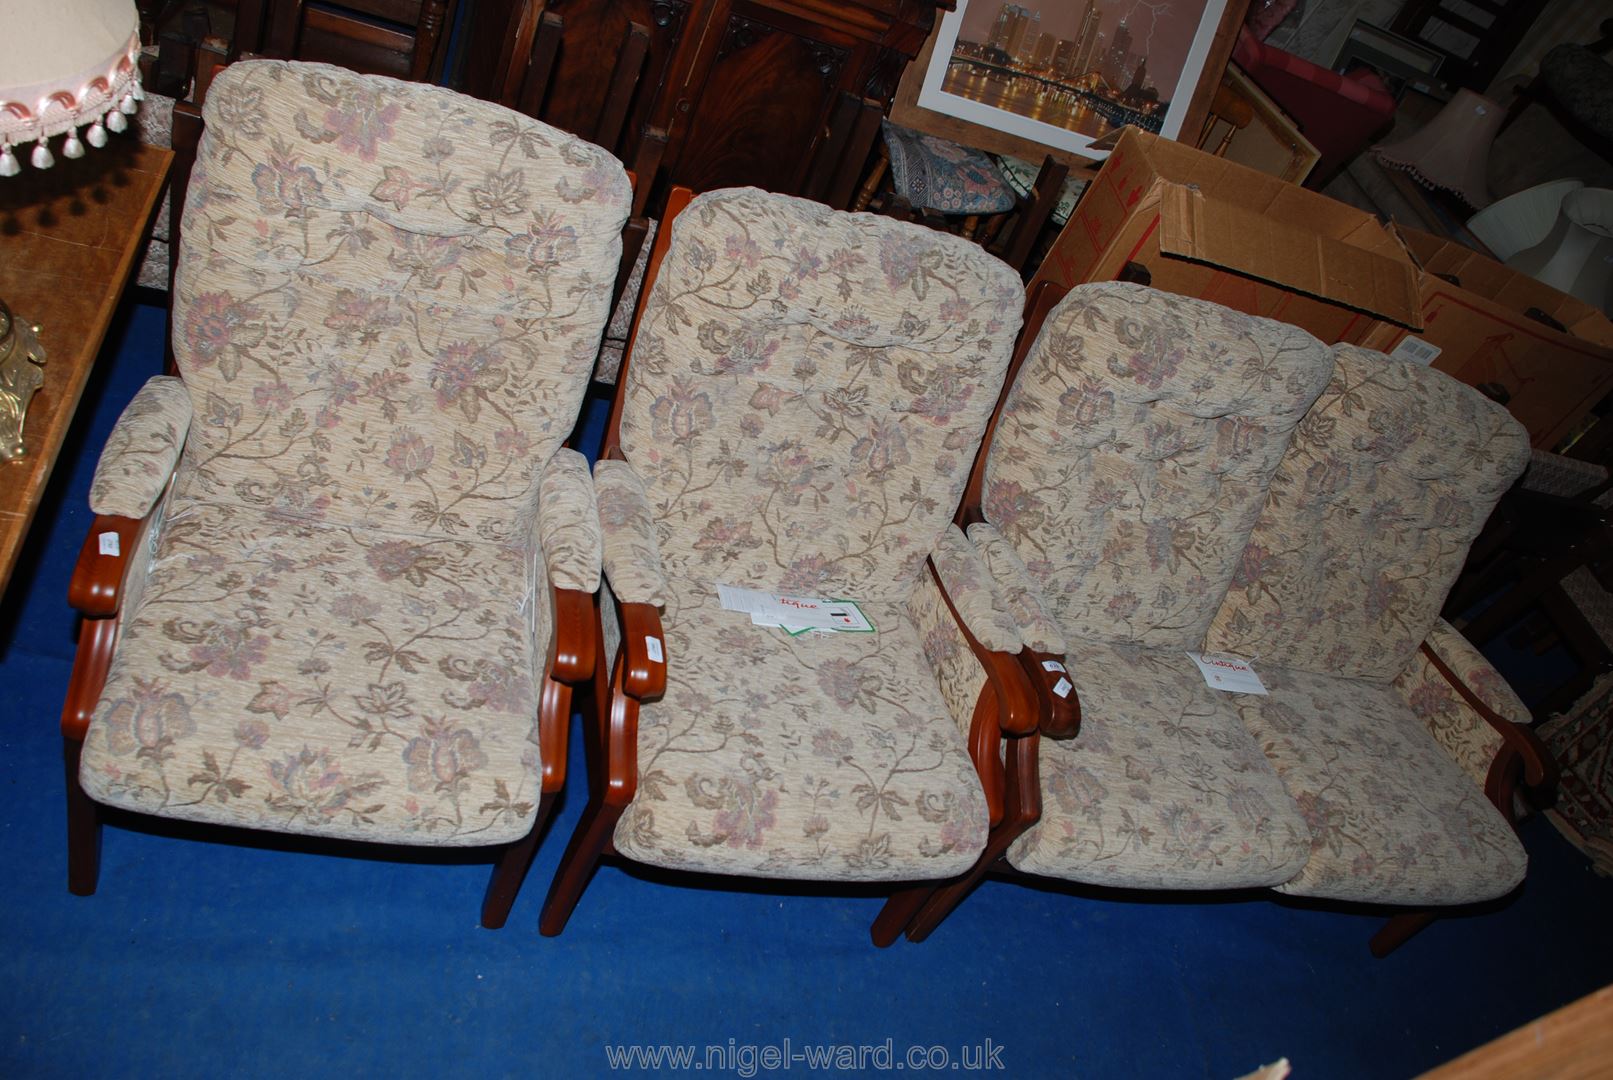 Two "Cintique" Winchester style armchairs and a matching two-seat sofa.